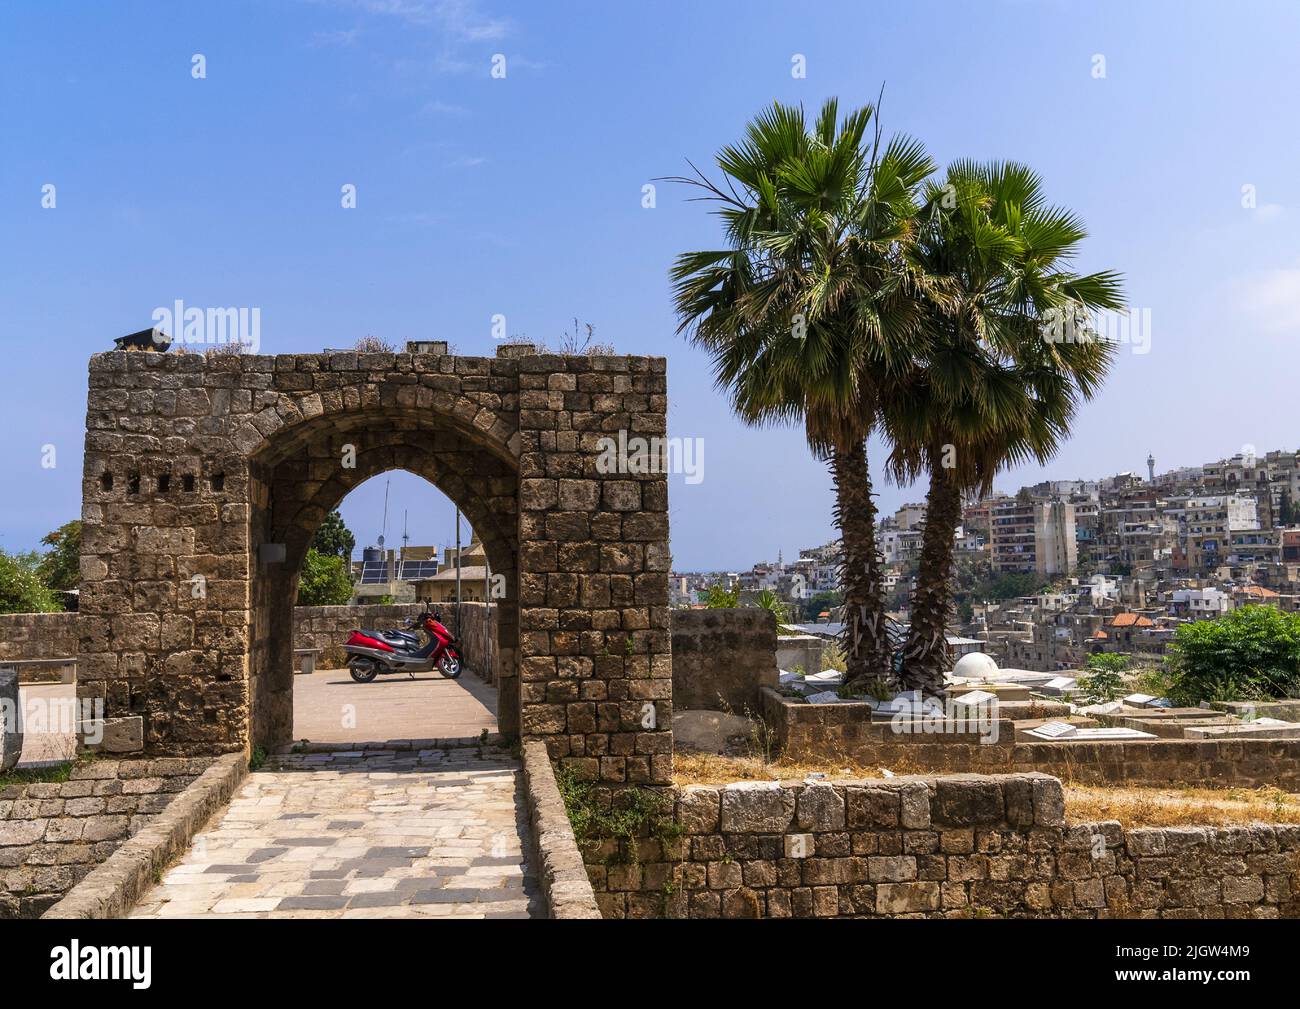 Citadel of Raymond de Saint Gilles in the town, North Governorate, Tripoli, Lebanon Stock Photo